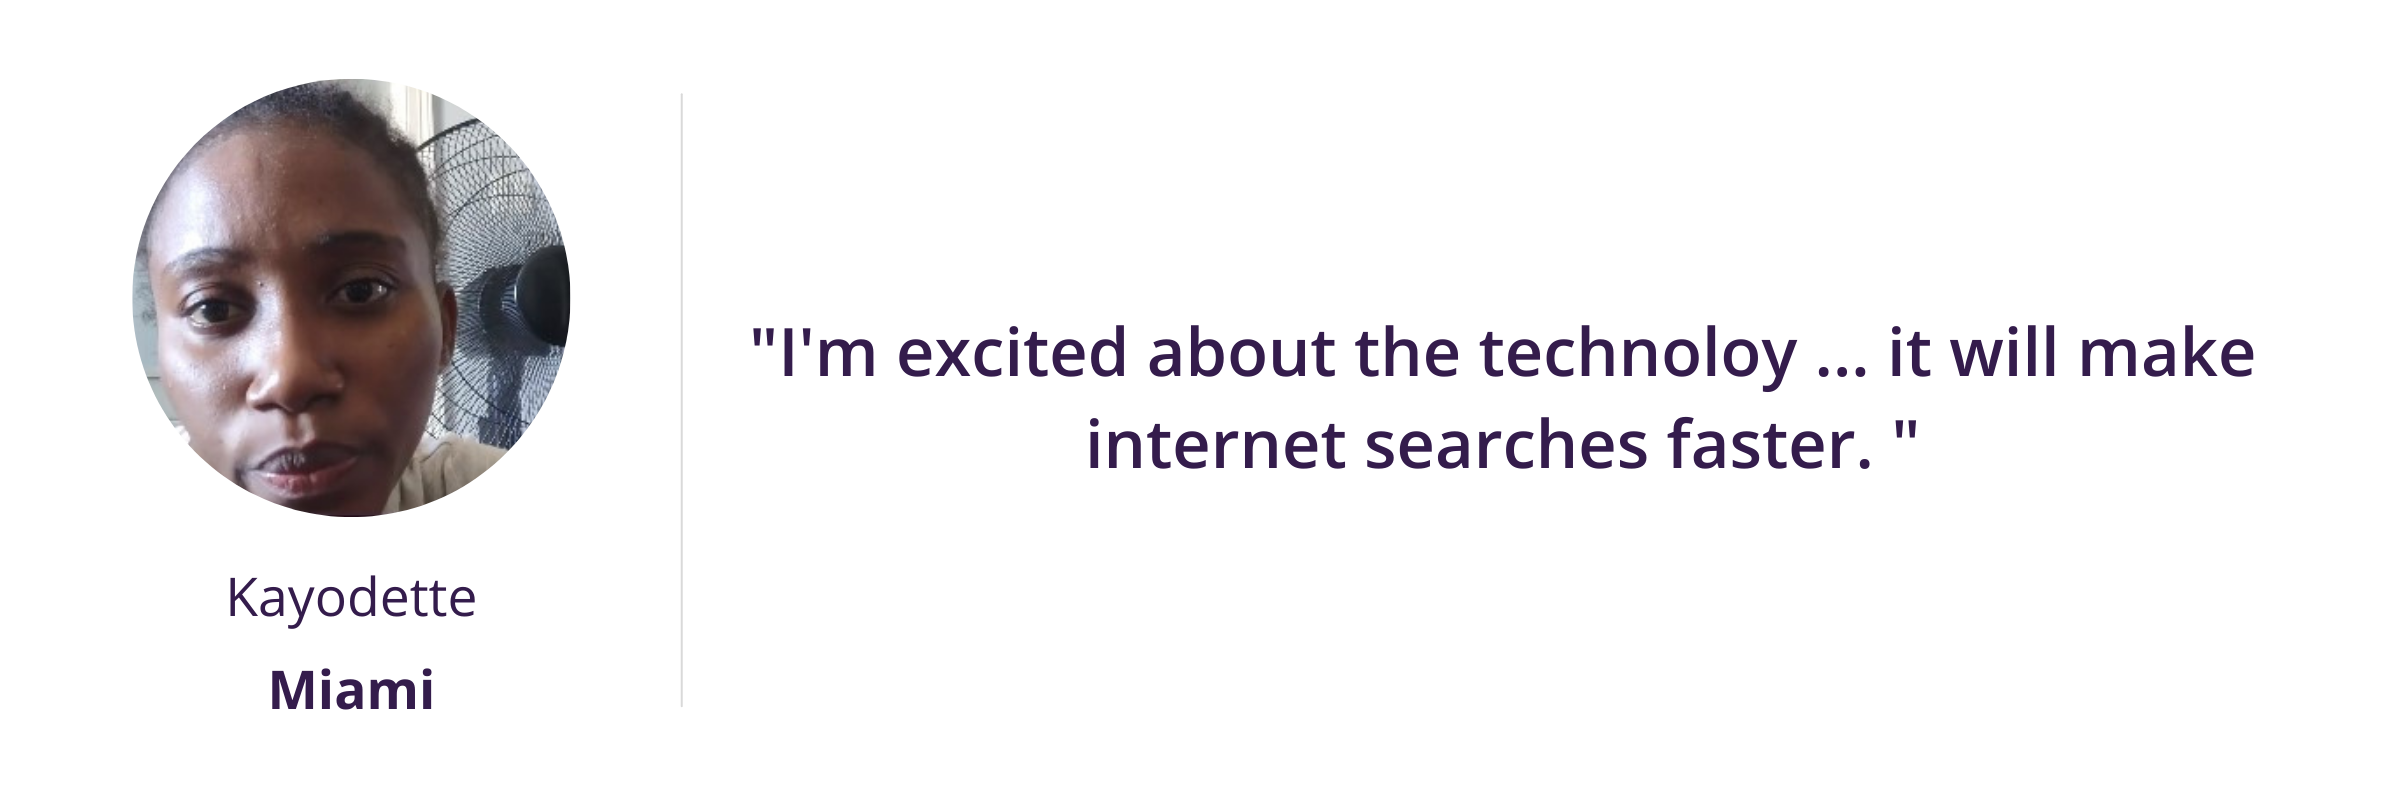 I'm excited about the technoloy ... it will make internet searches faster.